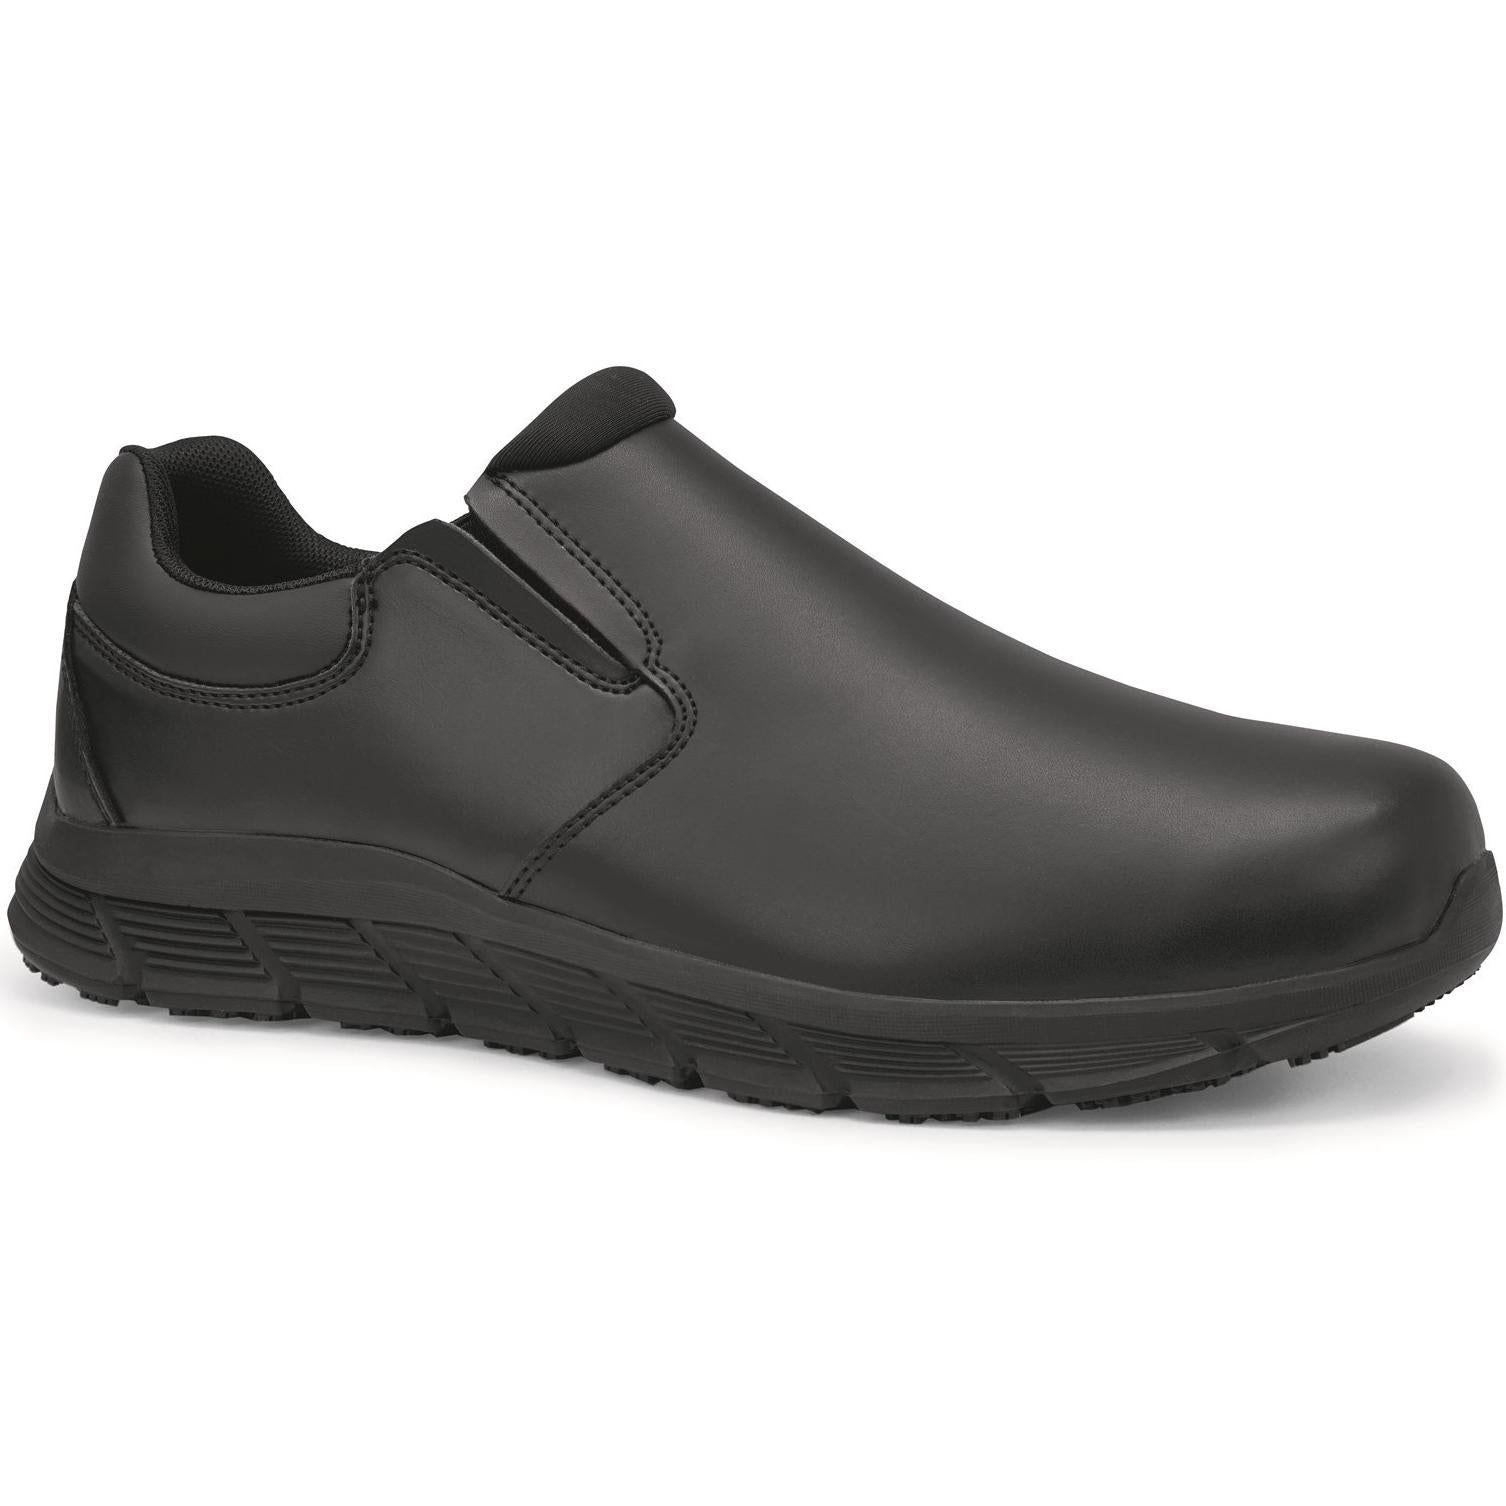 Shoes For Crews Cater II Women's Slip Resistant Shoe